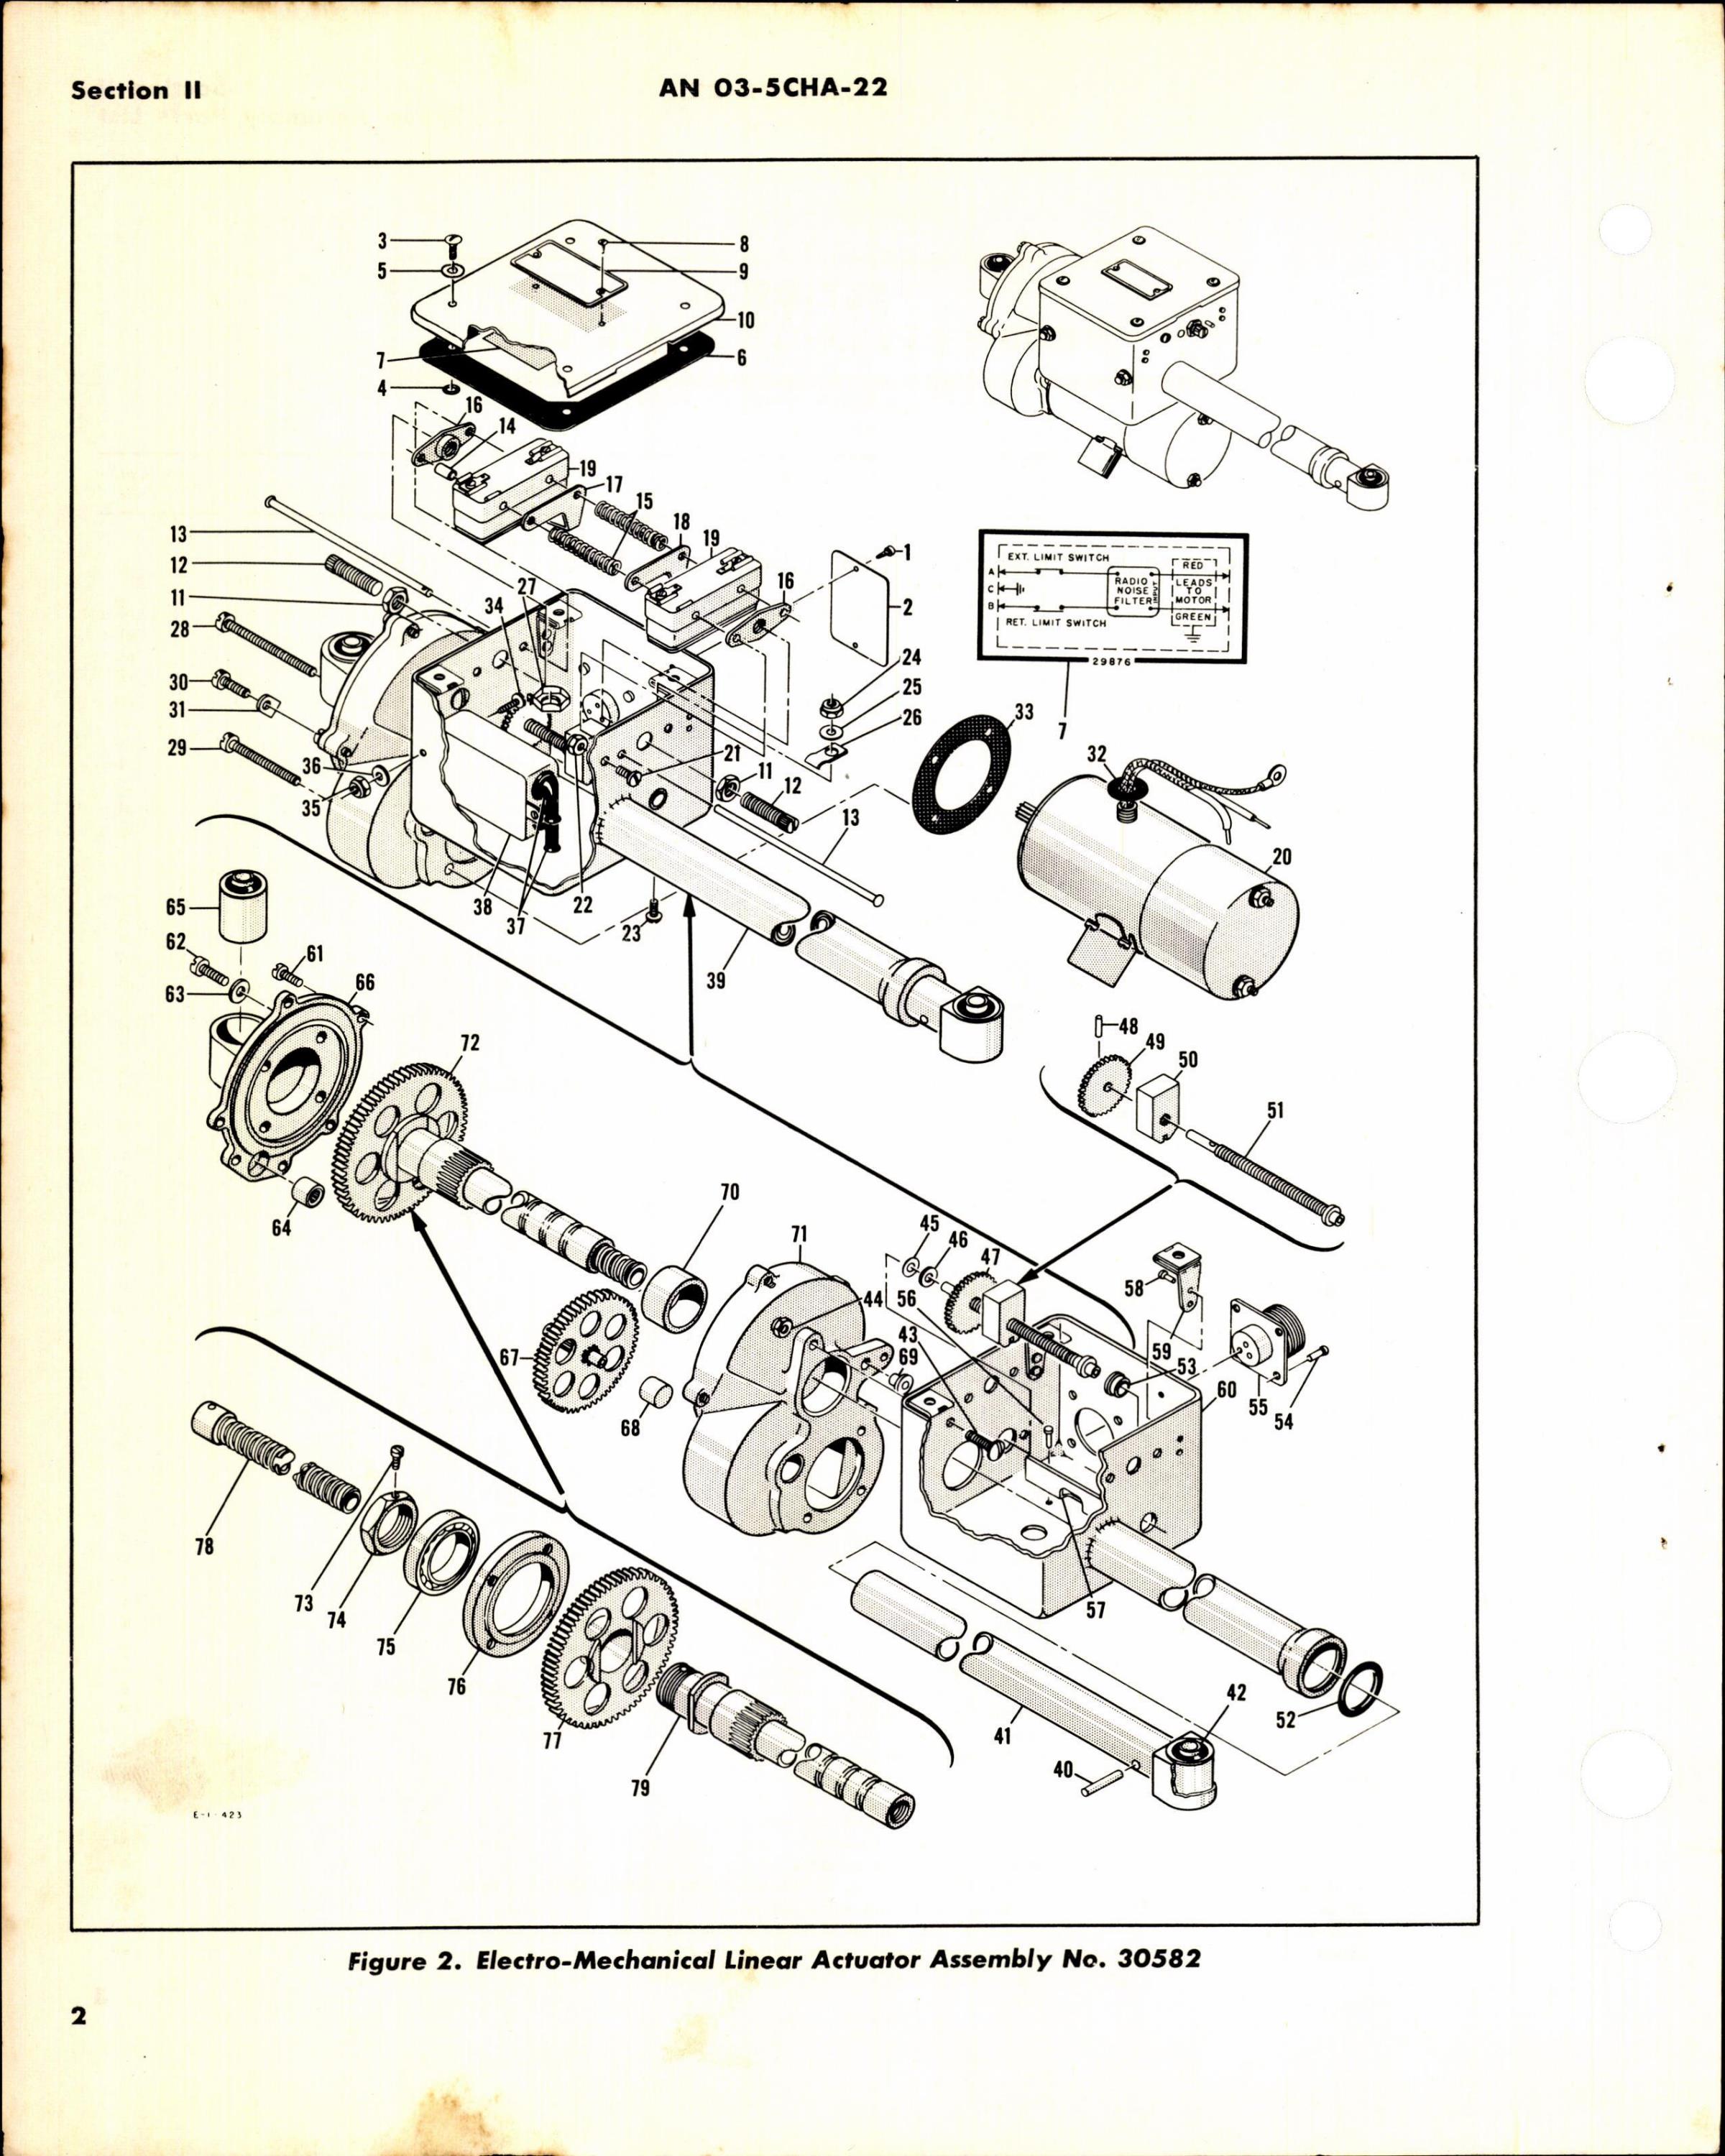 Sample page 4 from AirCorps Library document: Parts Catalog for Electro-Mechanical Linear Actuators